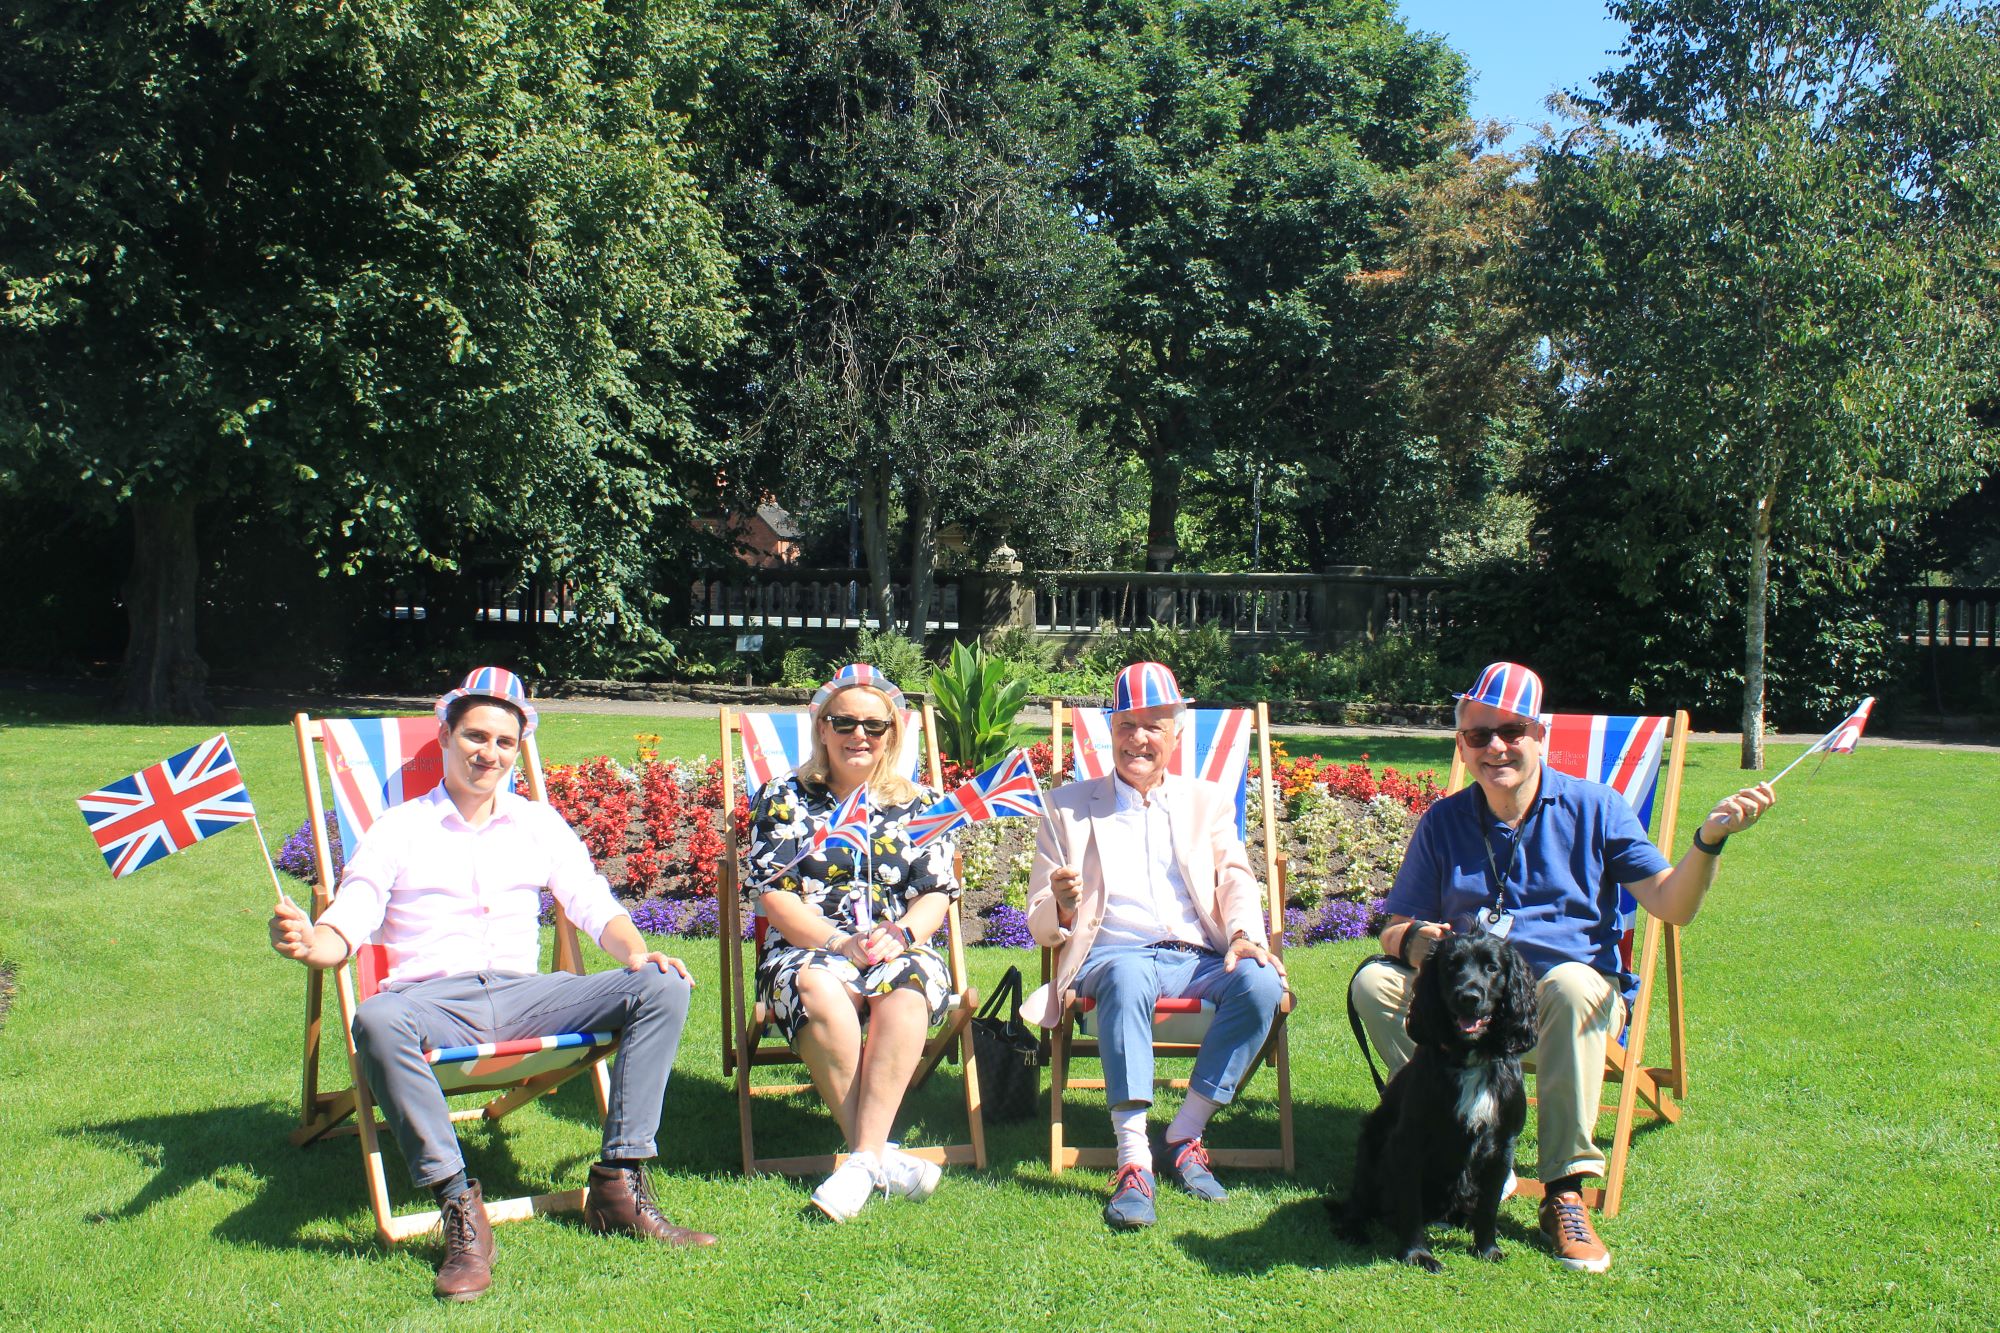 Looking forward to taking a seat at this year’s Lichfield Proms in Beacon Park are (from left) In-Form Solutions data Analyst Ben Griffiths, Business Manager Dawn Bond, Chairman David Poynton and Managing Director John Griffiths with Archie.